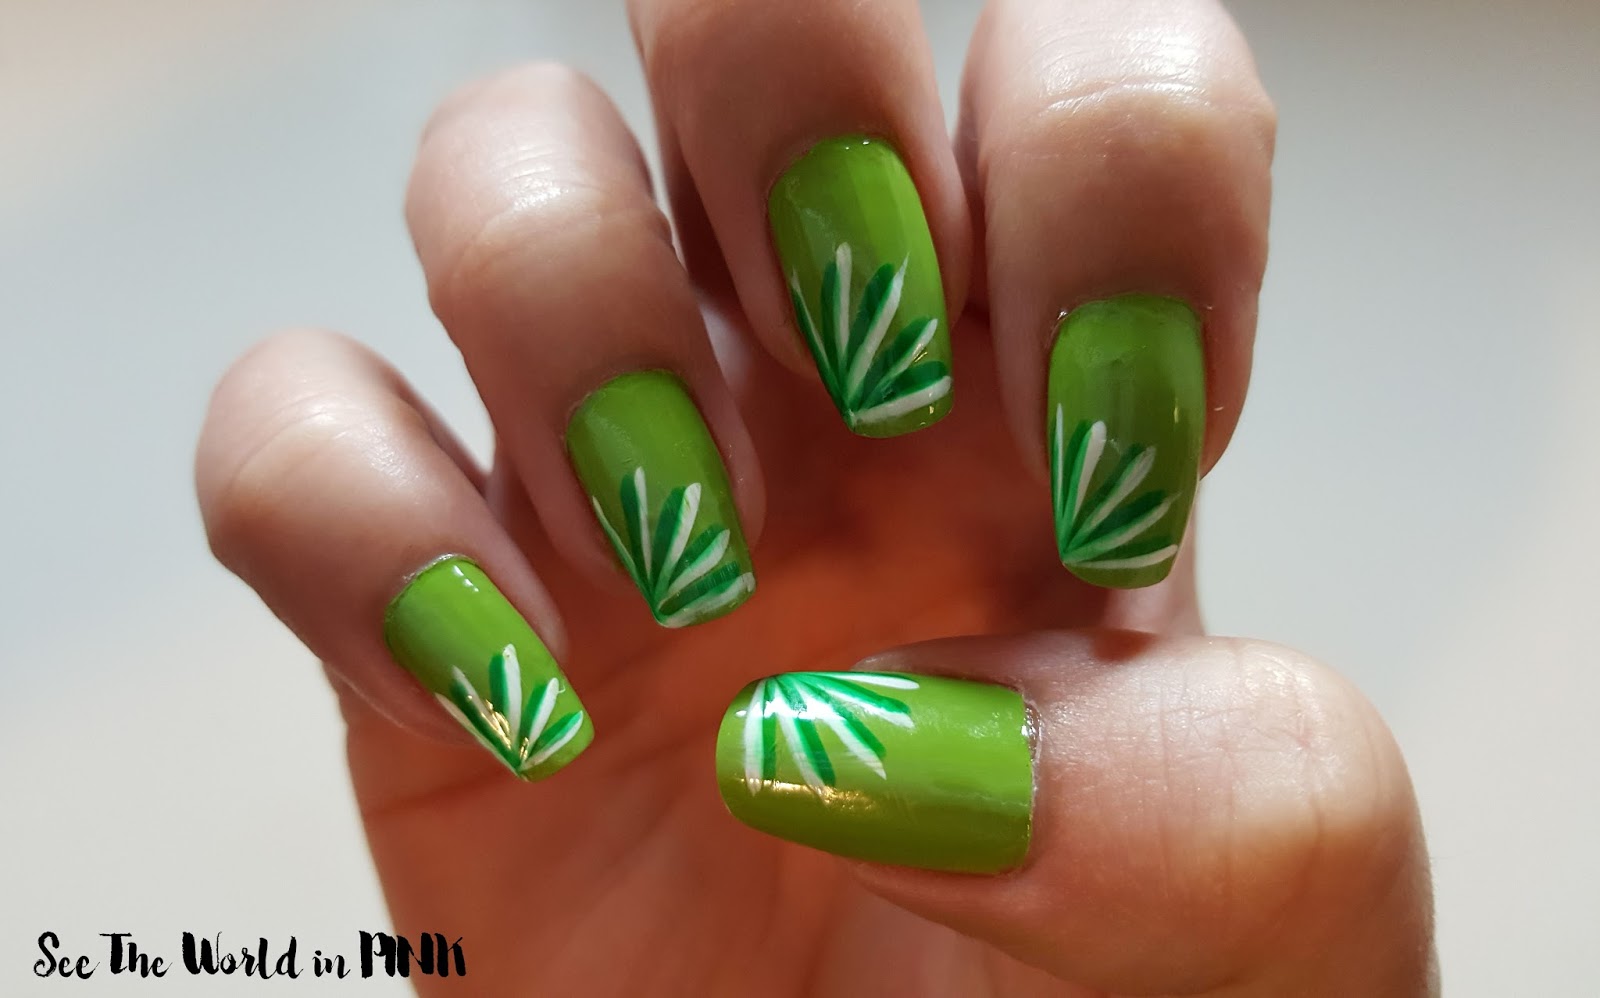 Manicure Monday - Colour of the Year "Greenery" Nails! 